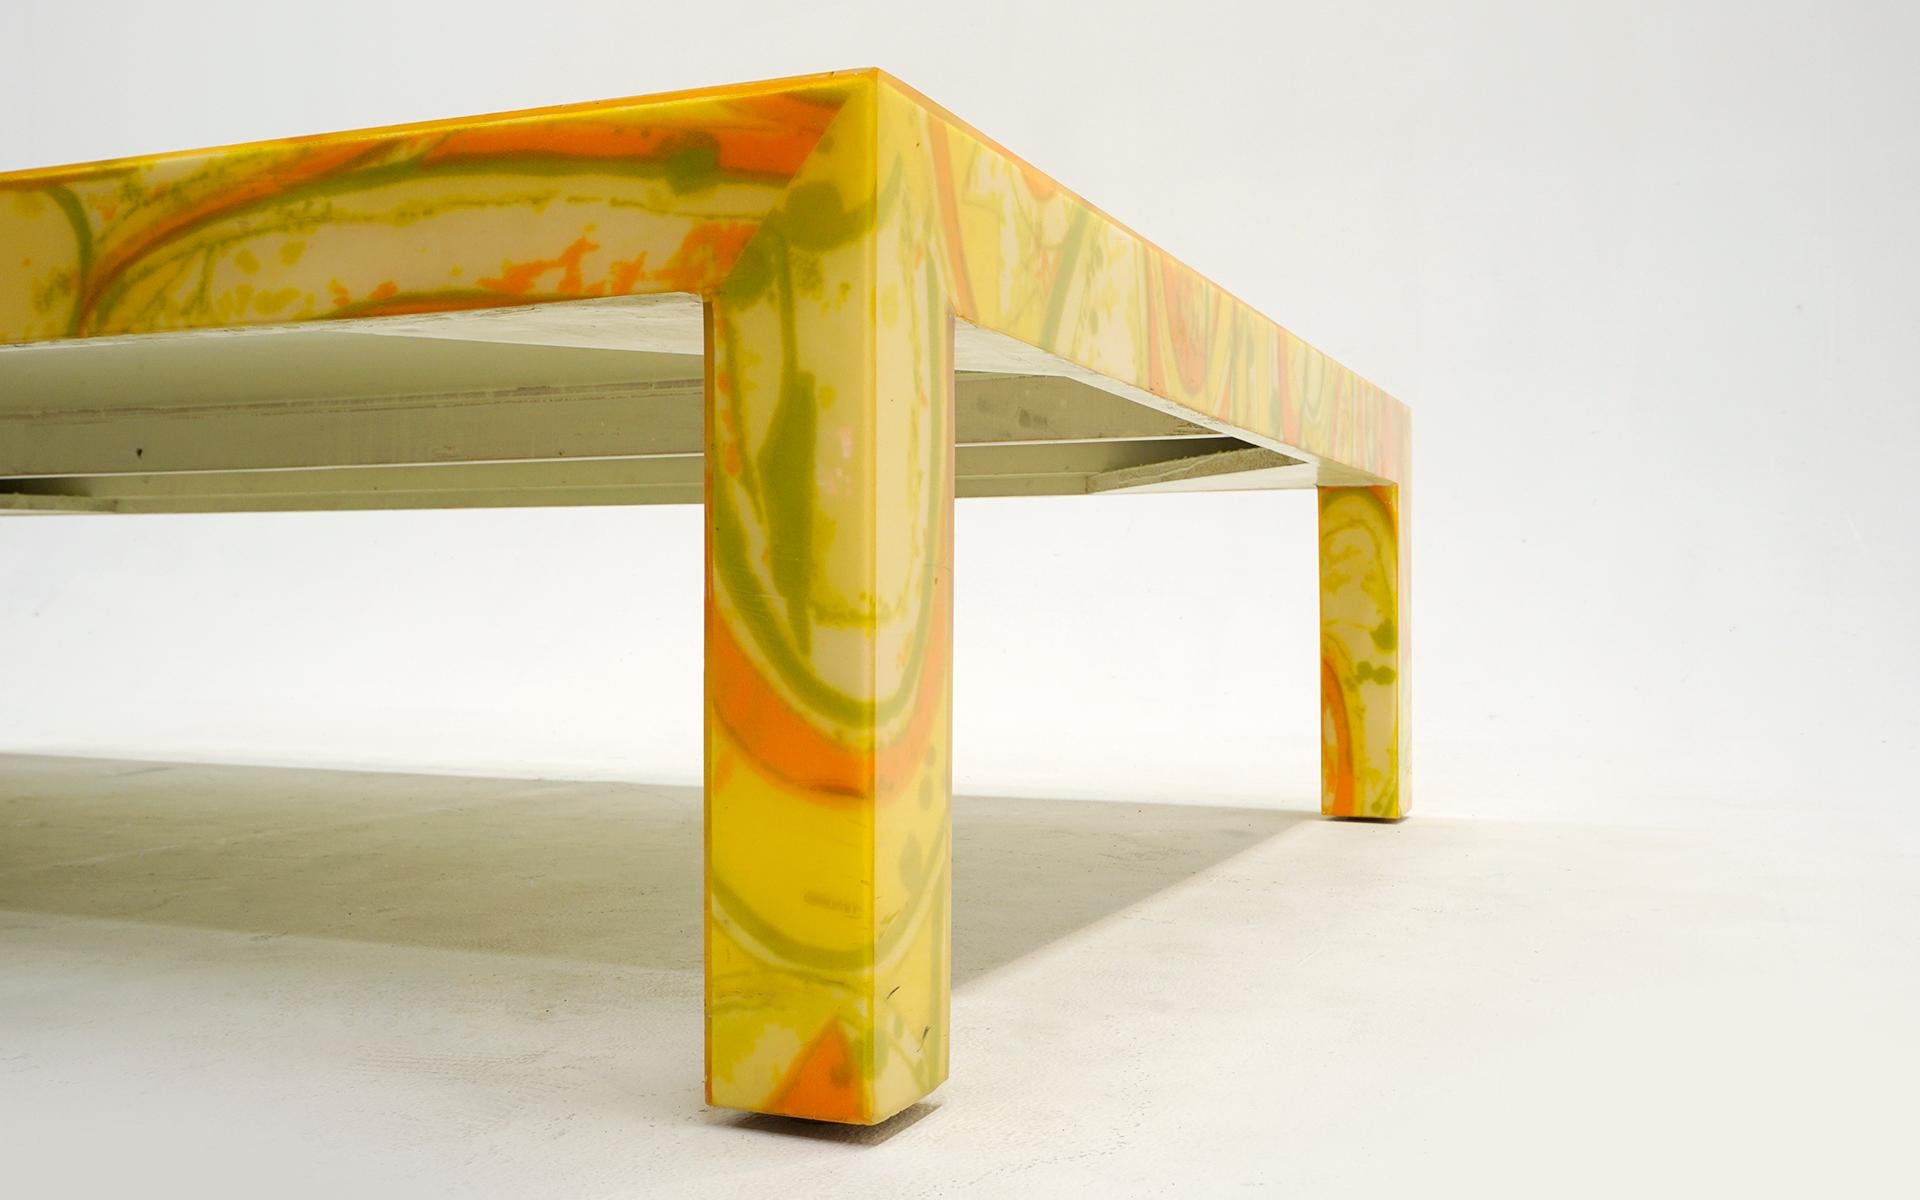 Large One of a Kind Coffee Table by Arthur Elrod for the Bolero Estate, 1966 For Sale 2